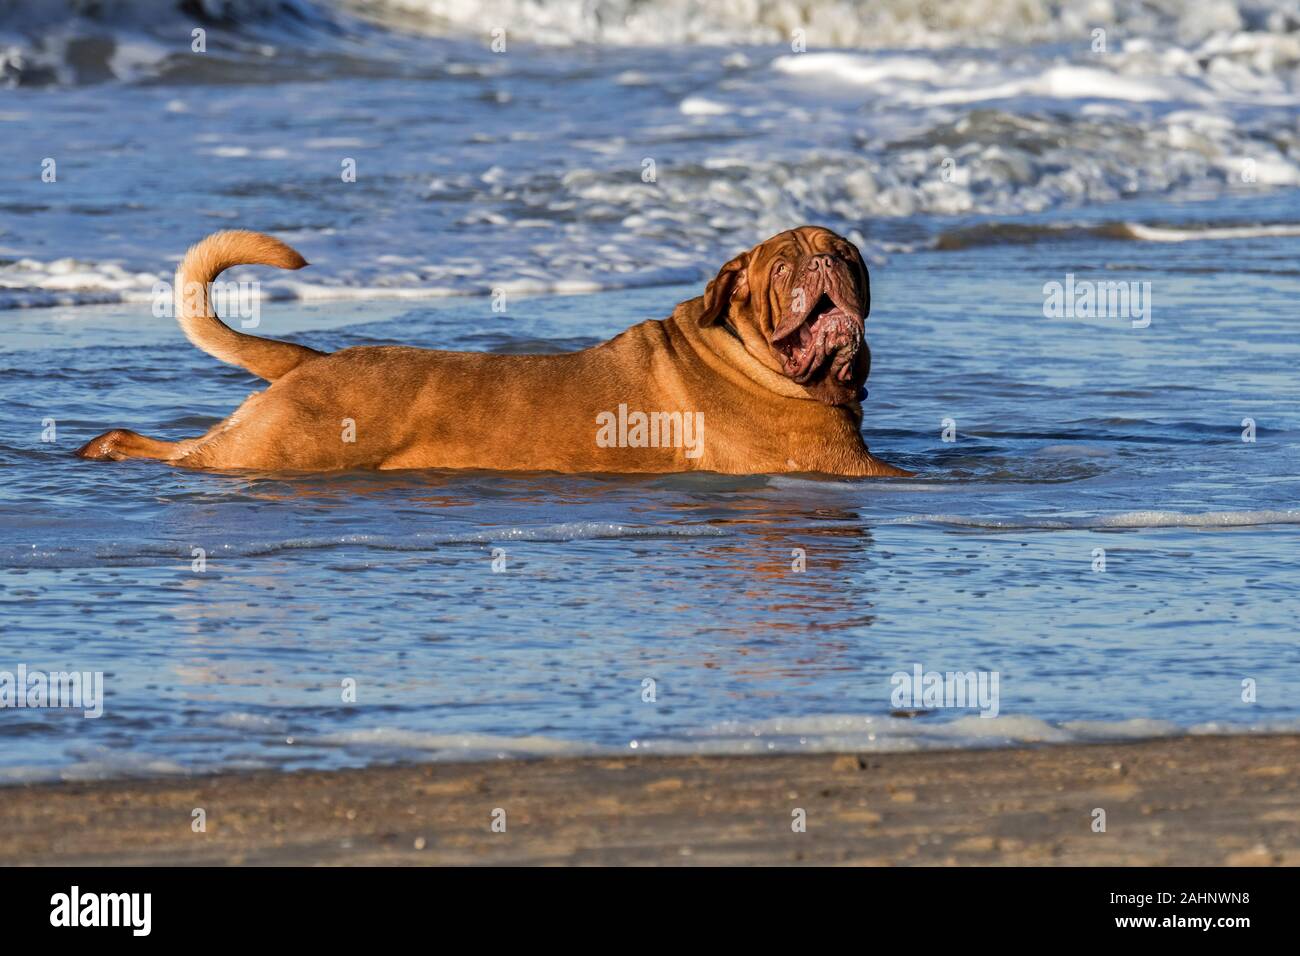 Unleashed Dogue de Bordeaux / French Mastiff / Bordeauxdog, dog cooling down stretched out in sea water at the beach Stock Photo